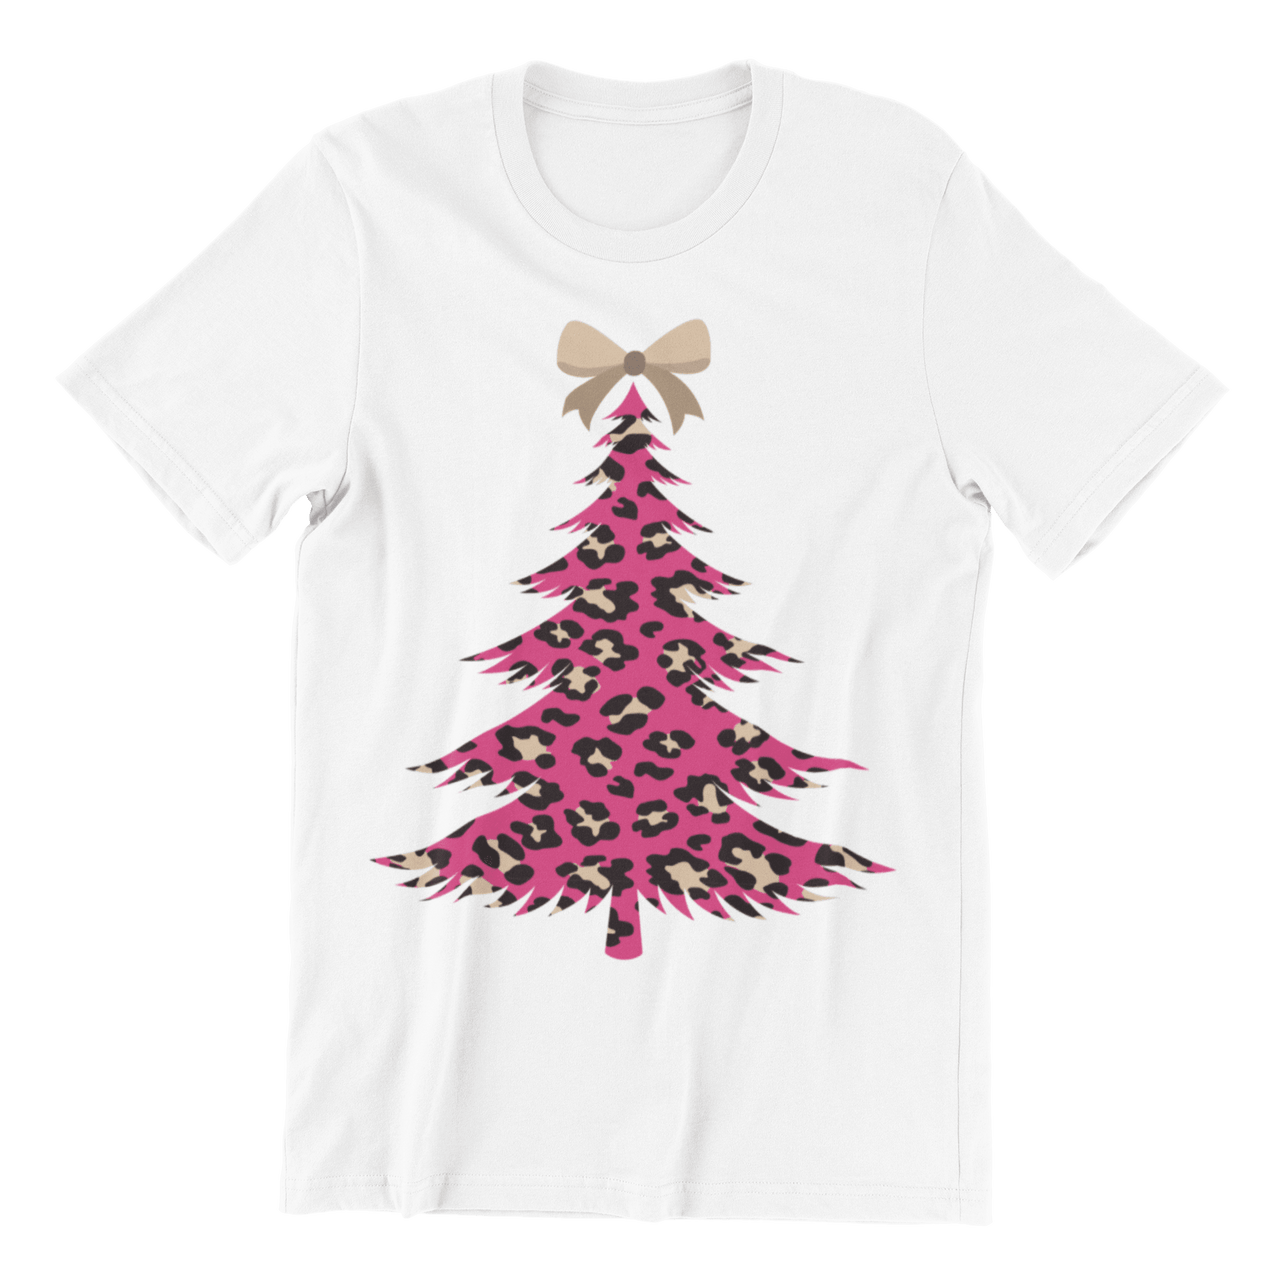 Unisex Adult Christmas Tree For Men and Women Unisex T-Shirt For Men And Women 8Ball